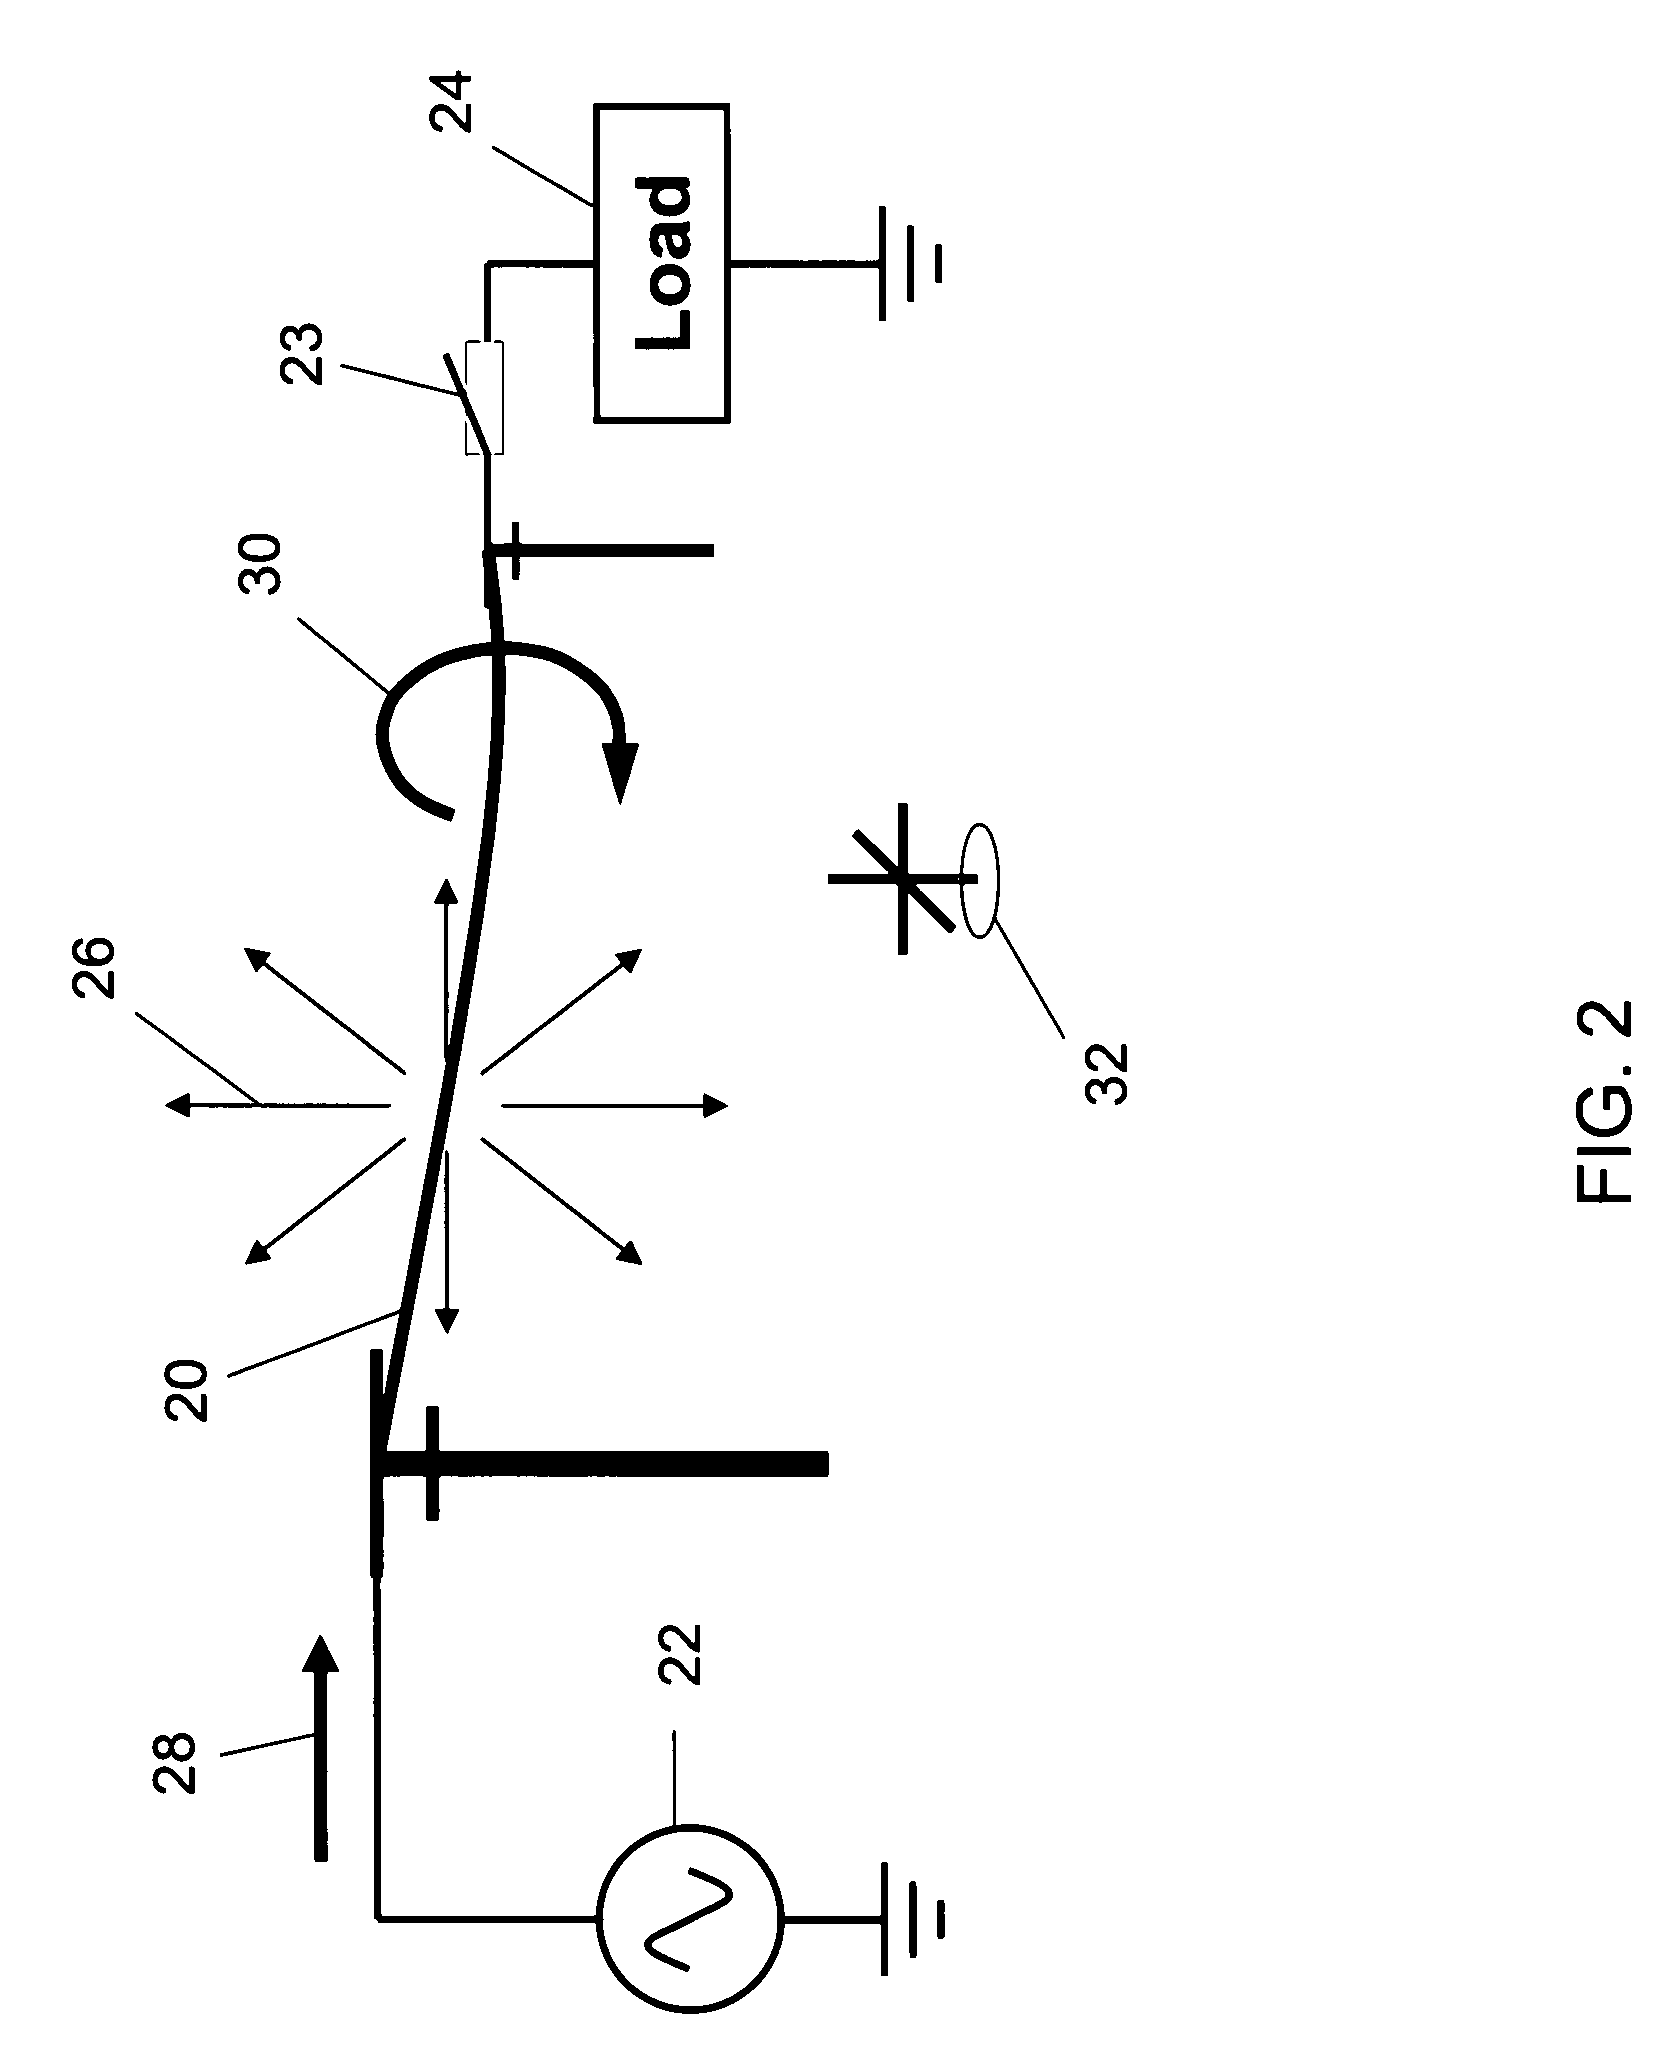 Methods for detecting and classifying loads on AC lines